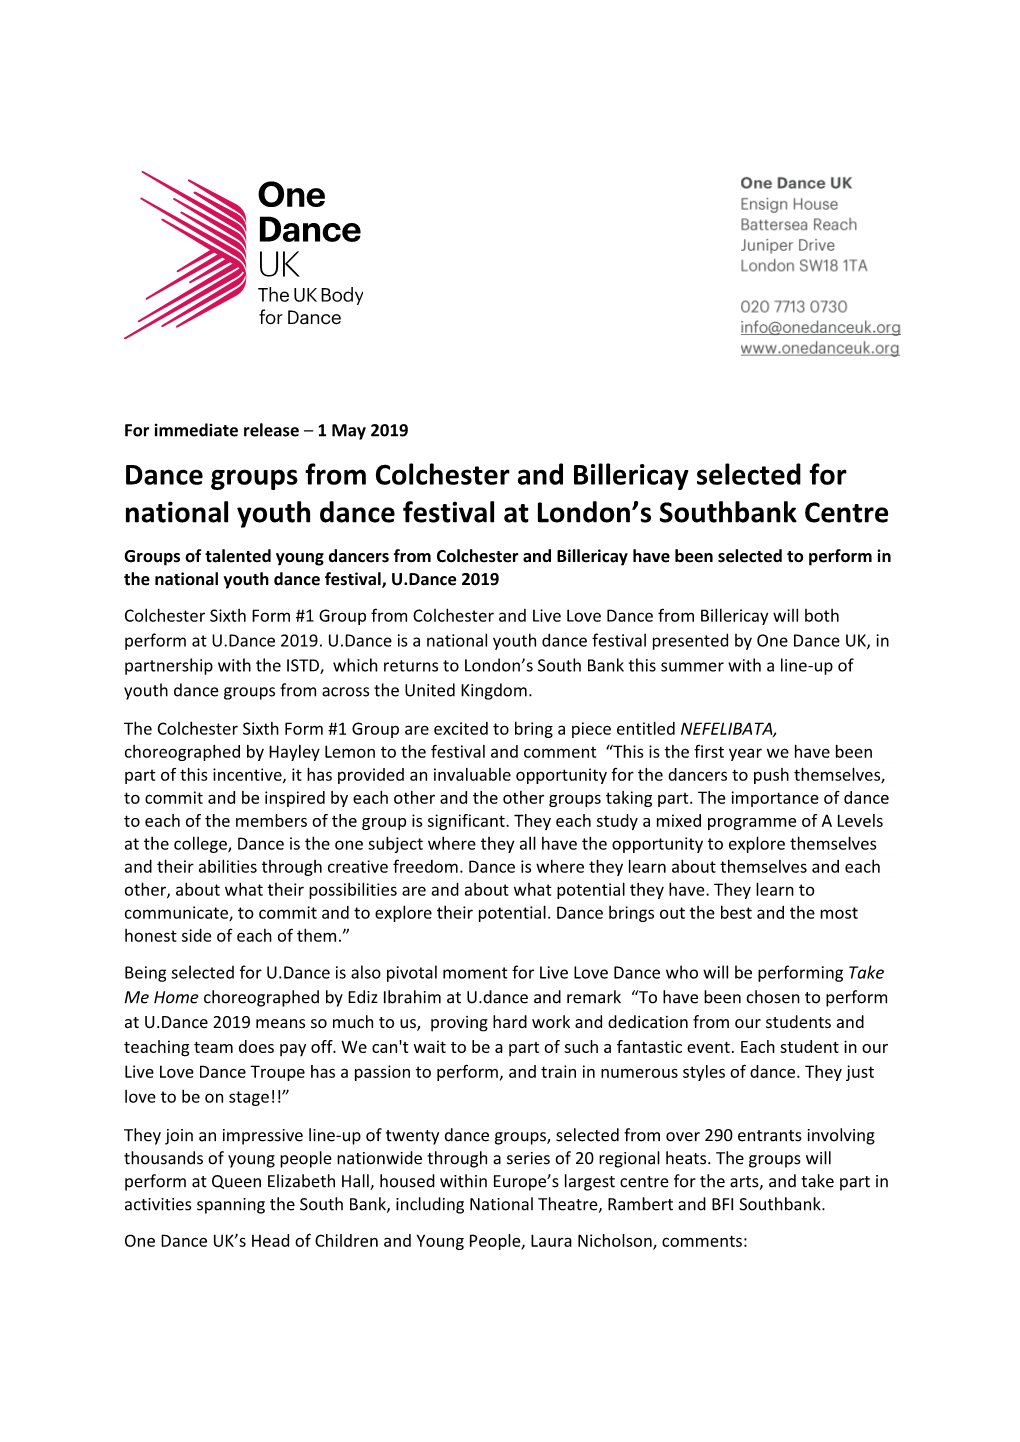 Dance Groups from Colchester and Billericay Selected for National